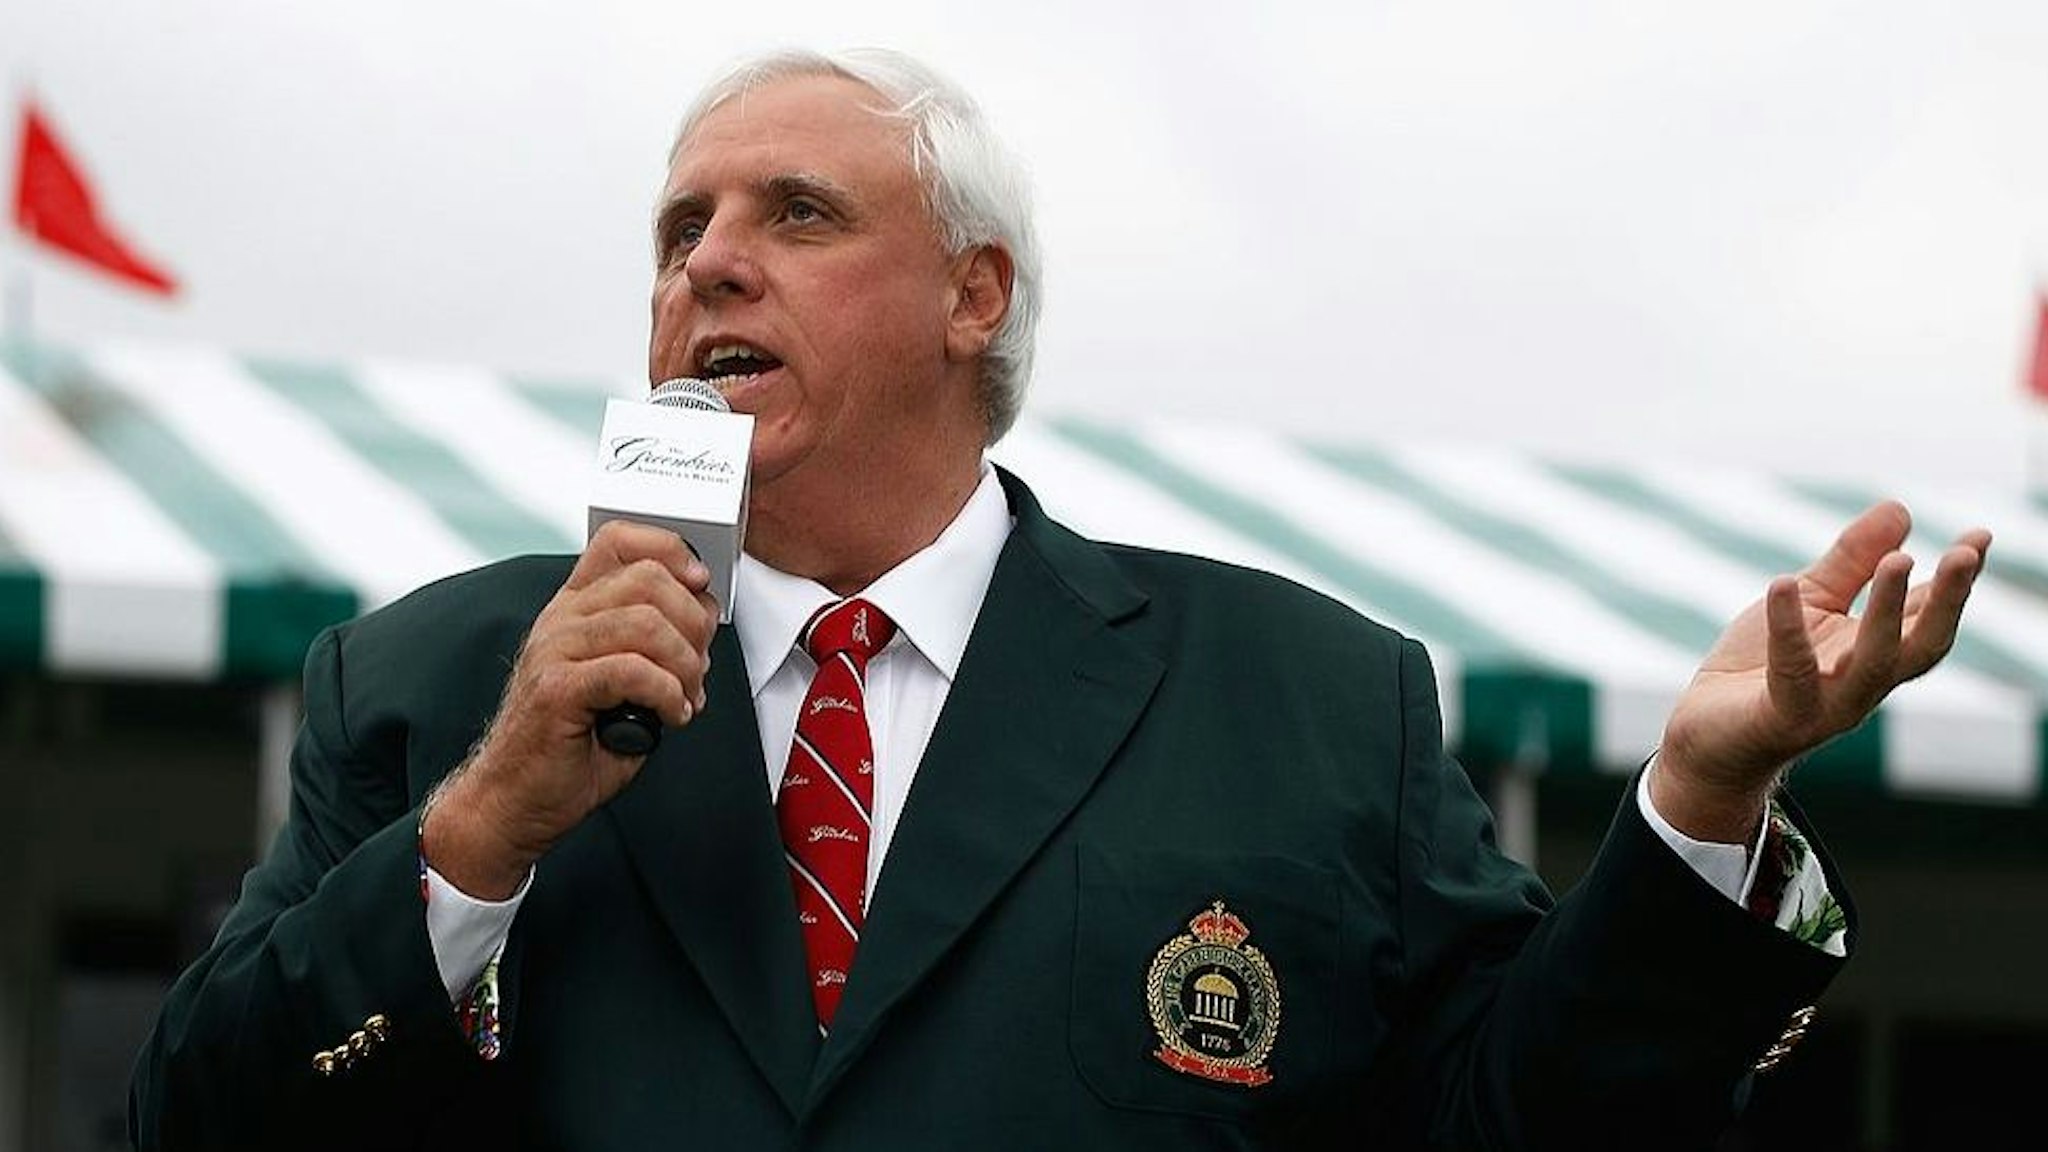 WHITE SULPHUR SPRINGS, WV - AUGUST 01: Jim Justice, owner of the Greenbrier Resort, speaks to the gallery after Stuart Appleby's victory at the Greenbrier Classic on August 1, 2010 in White Sulphur Springs, West Virginia.